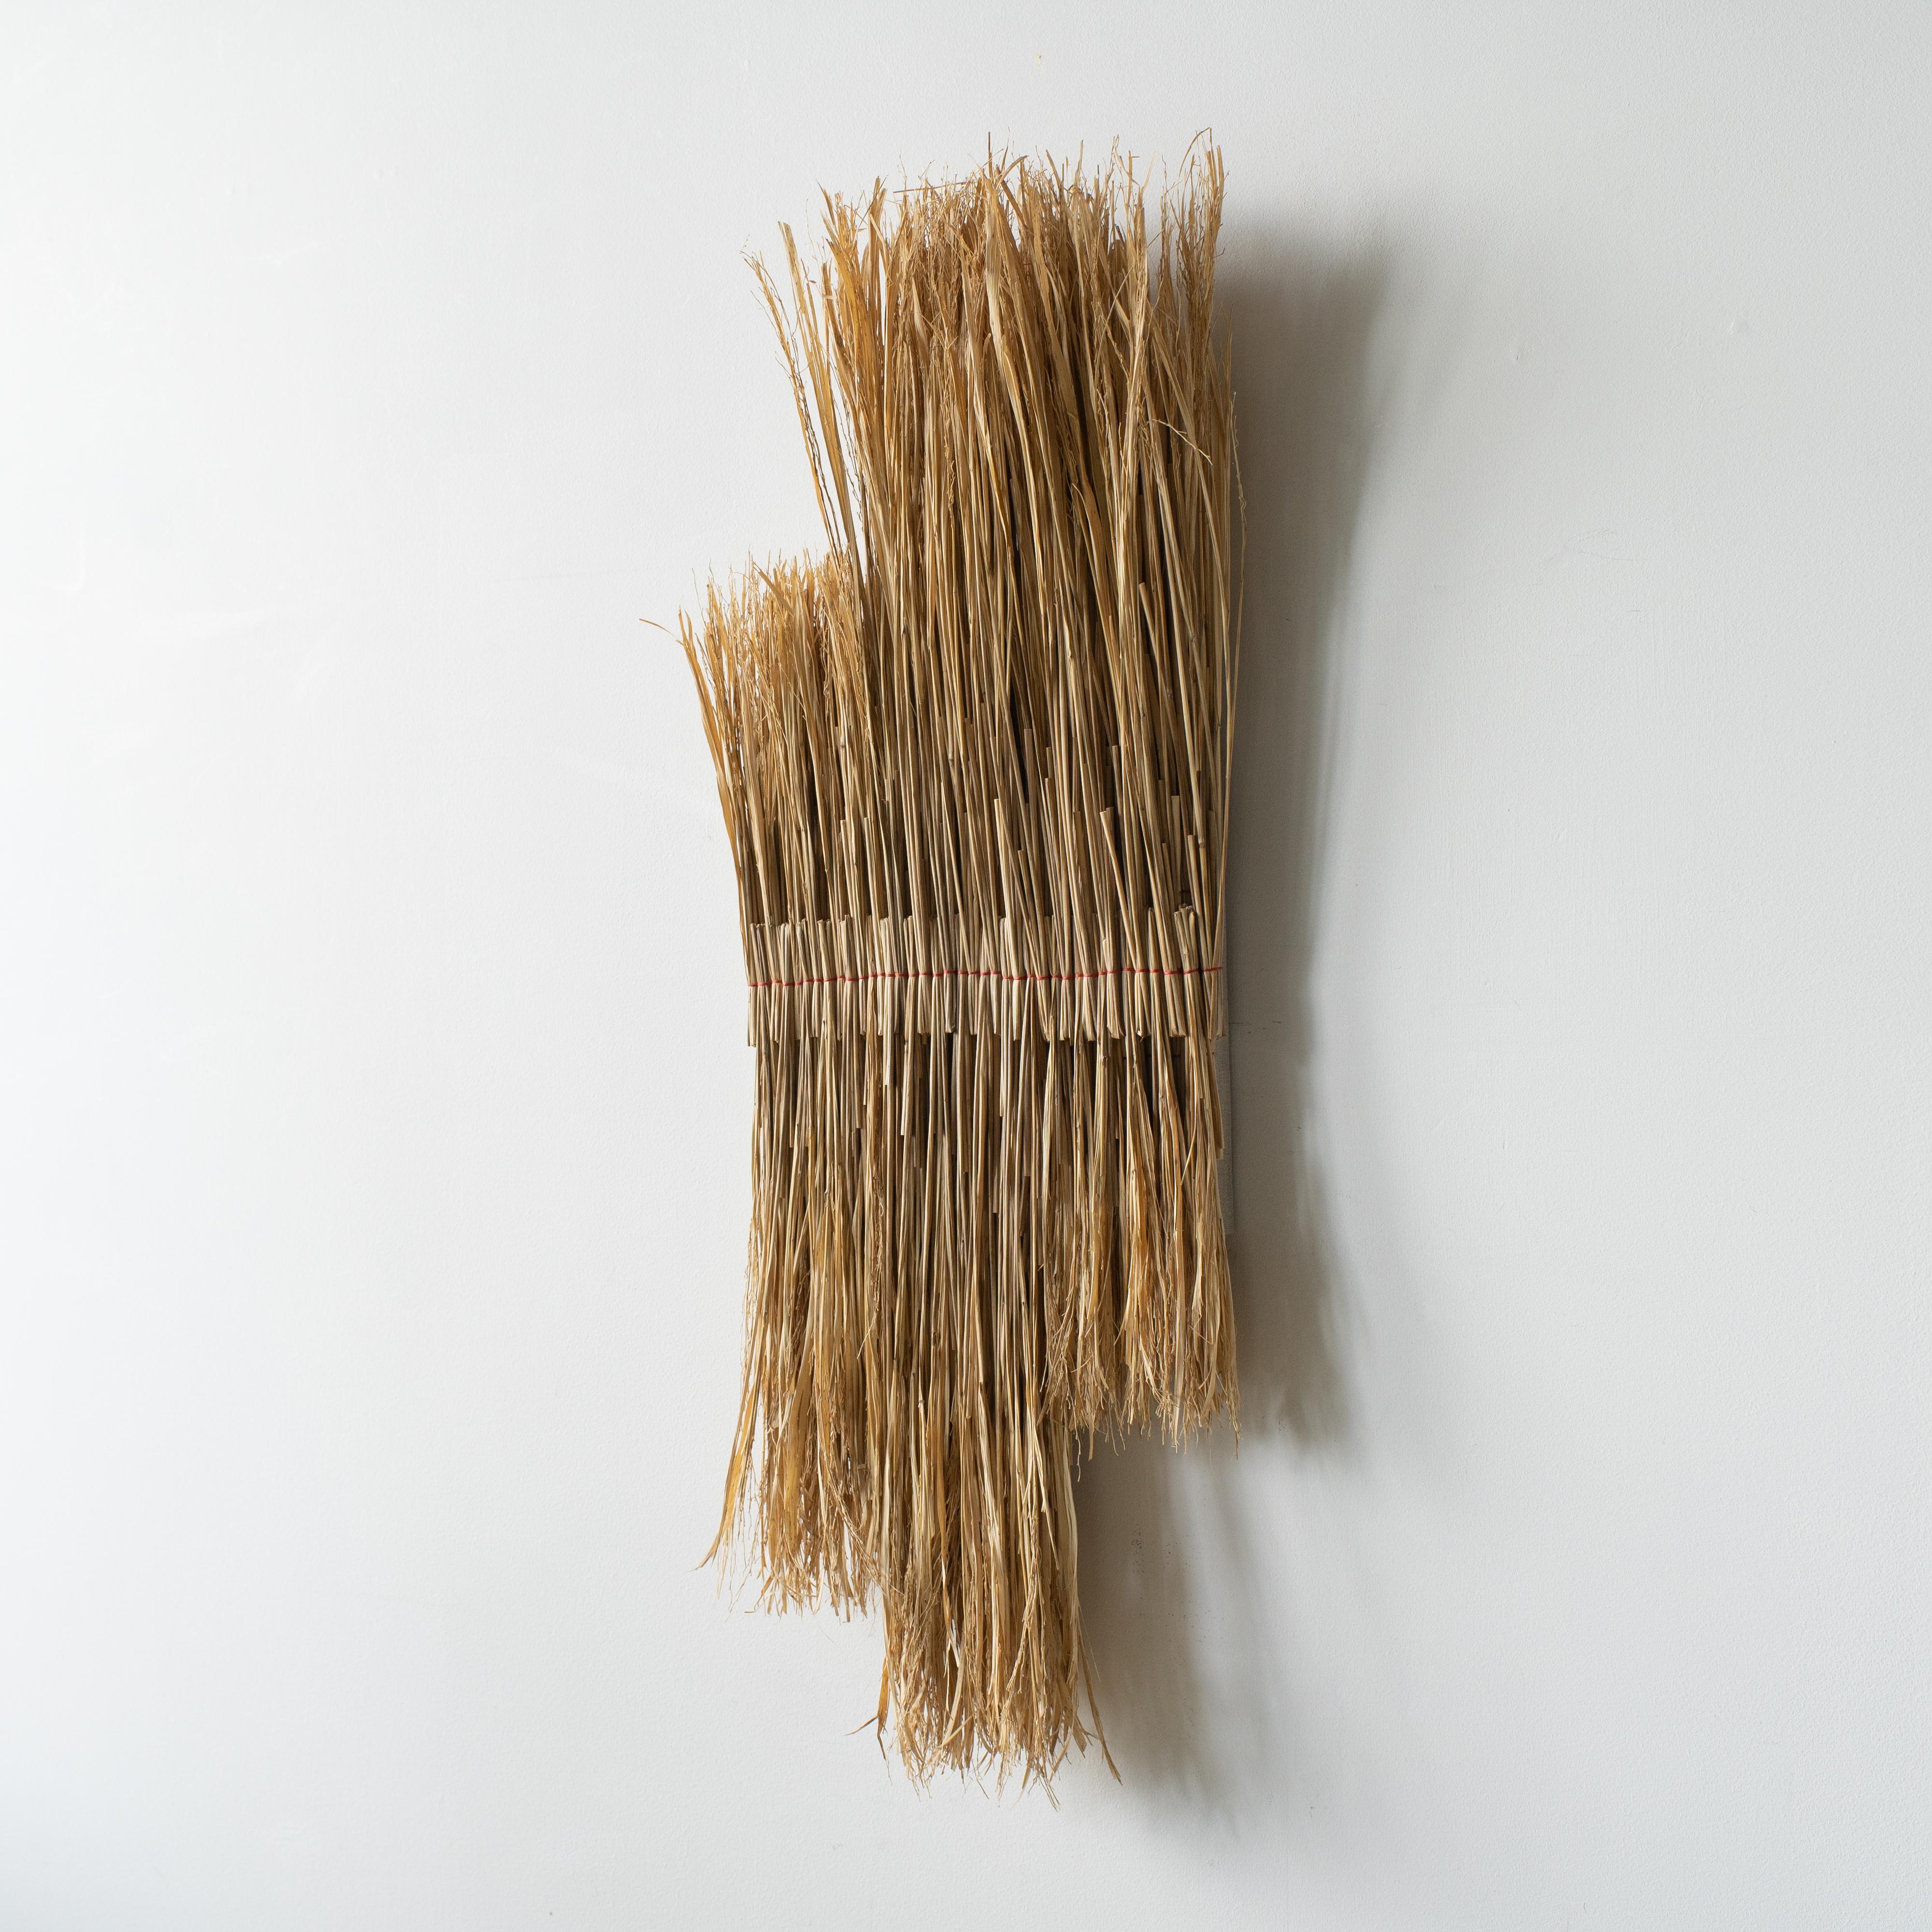 Hand-sewed rice straw art by ARKO. 
Title: Composition Rubato
This is one of the series named 